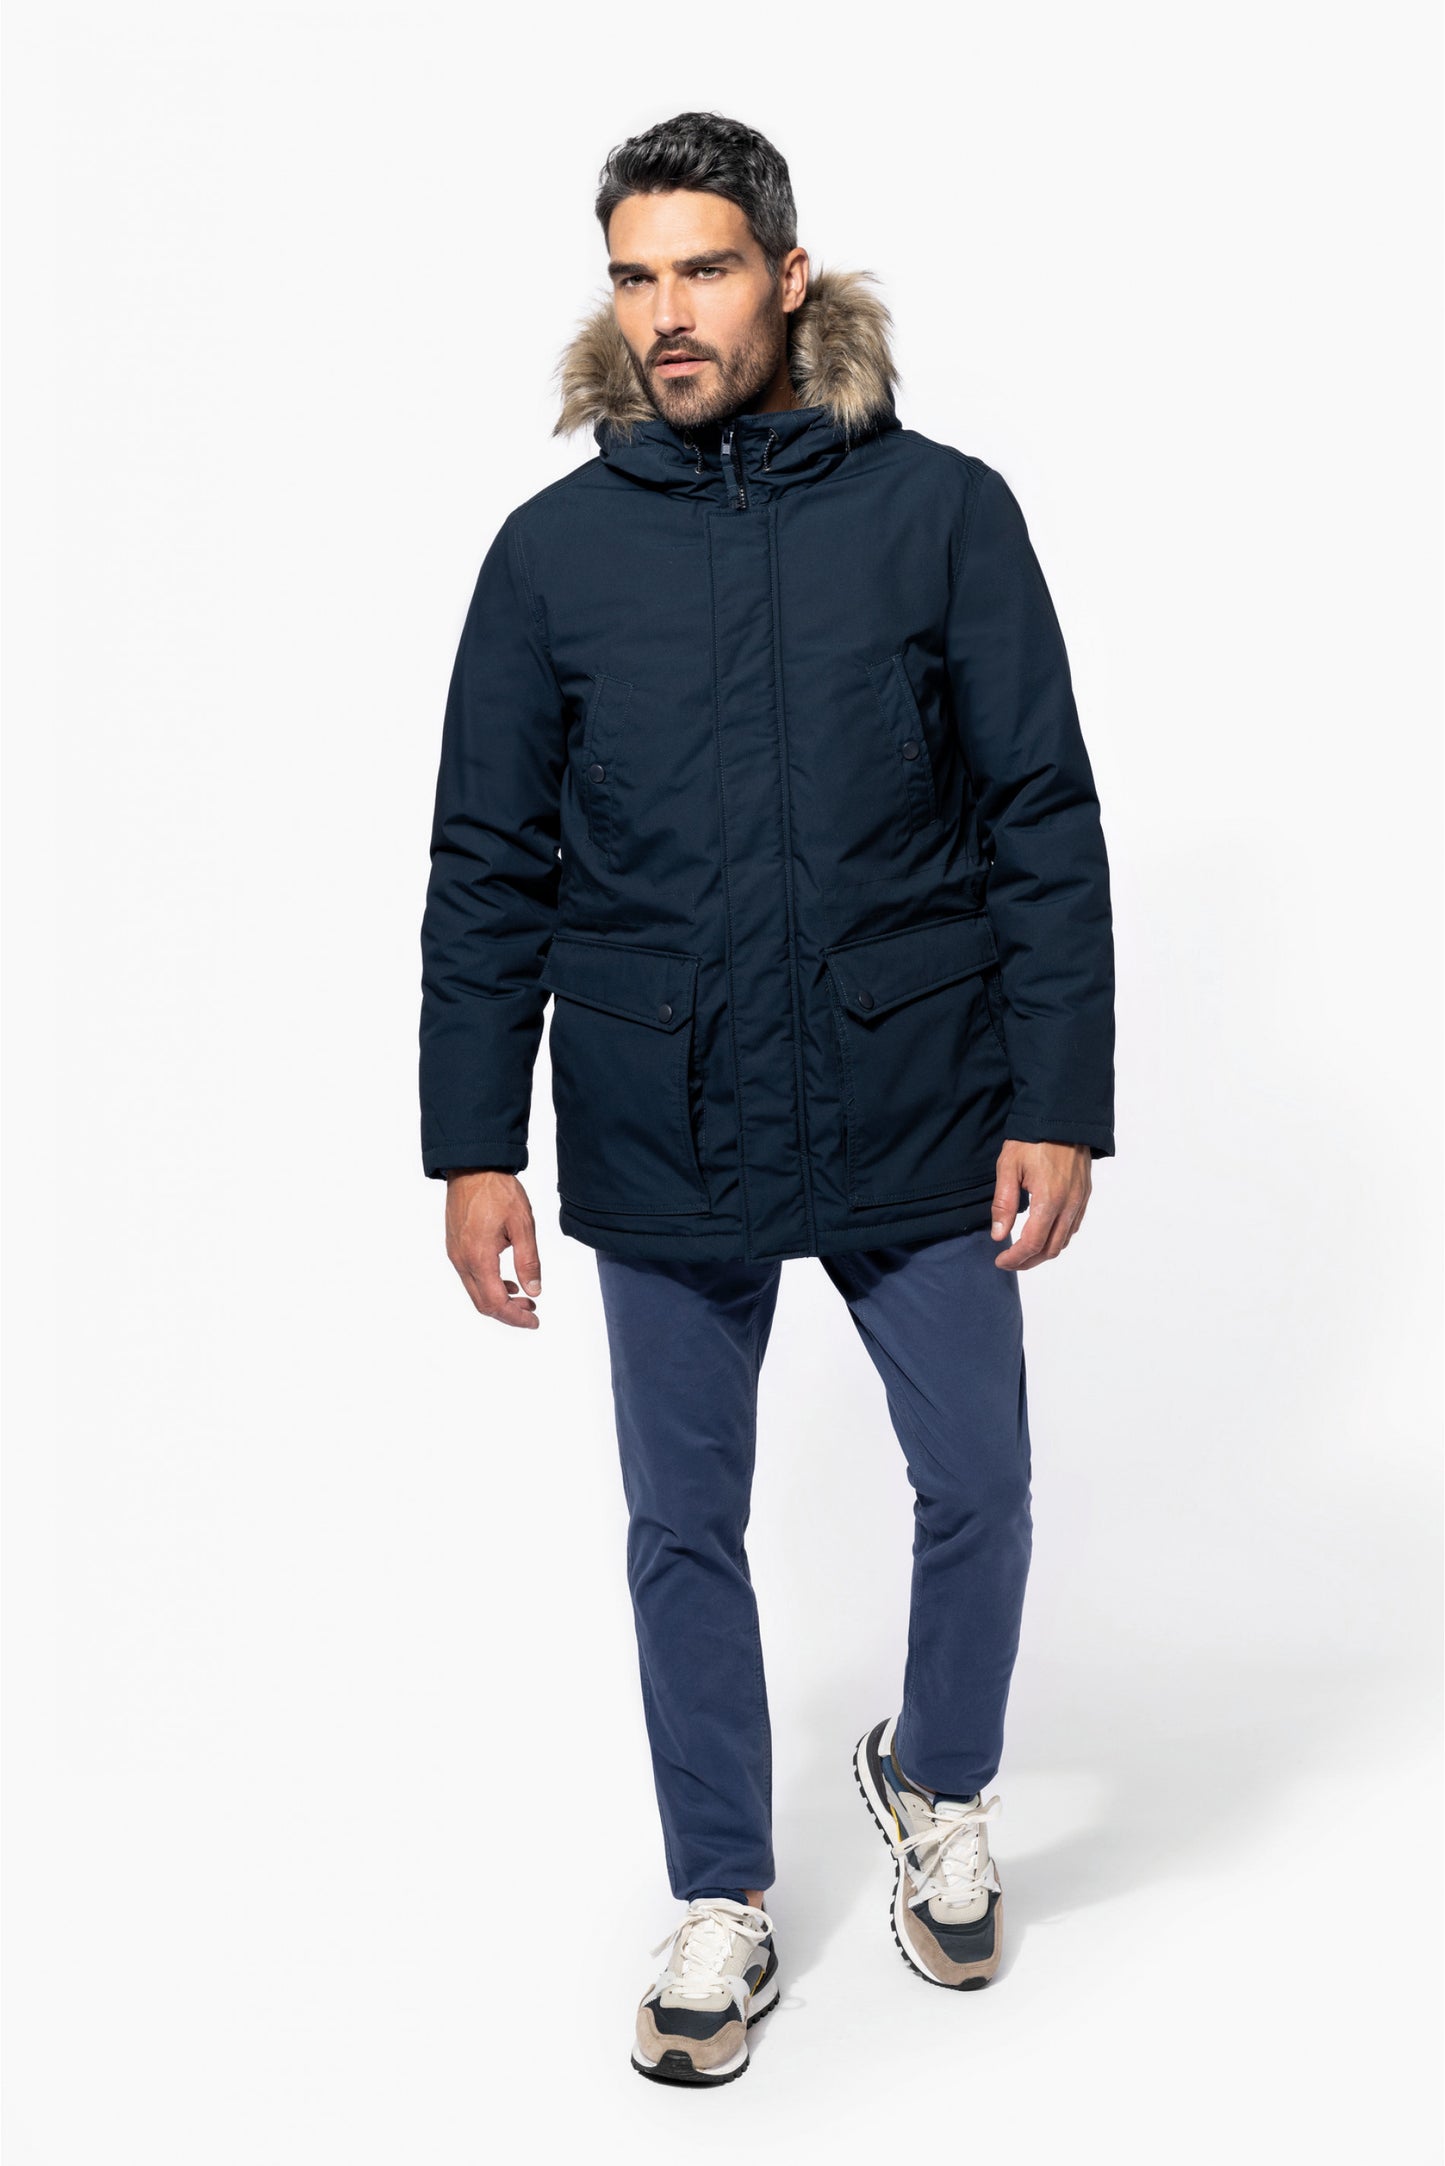 K621 - Parka grand froid